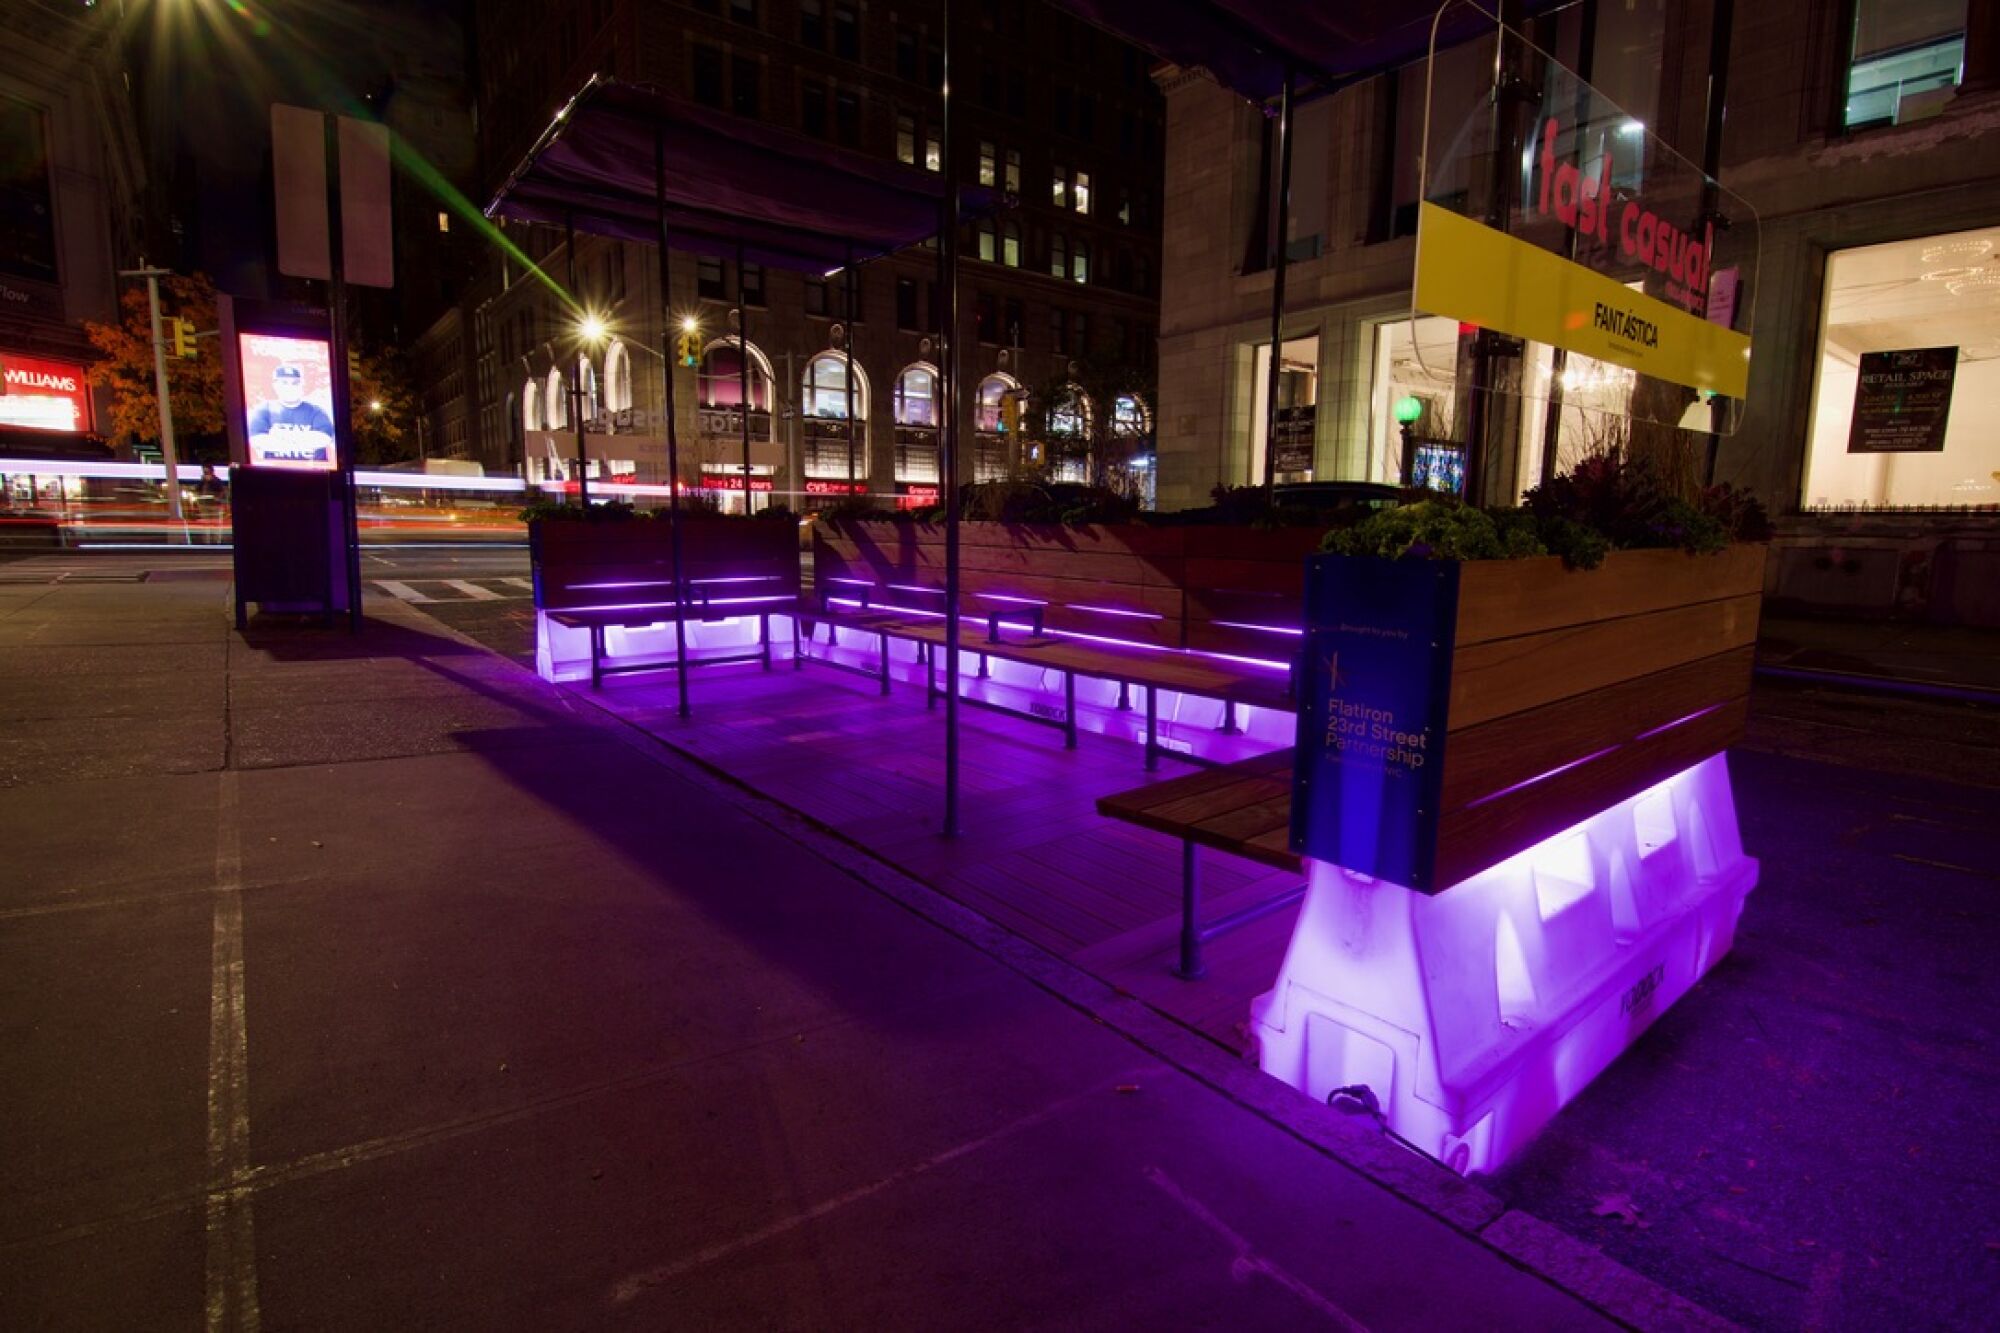 A parklet designed with illuminated lavender-colored water barriers is seen at night